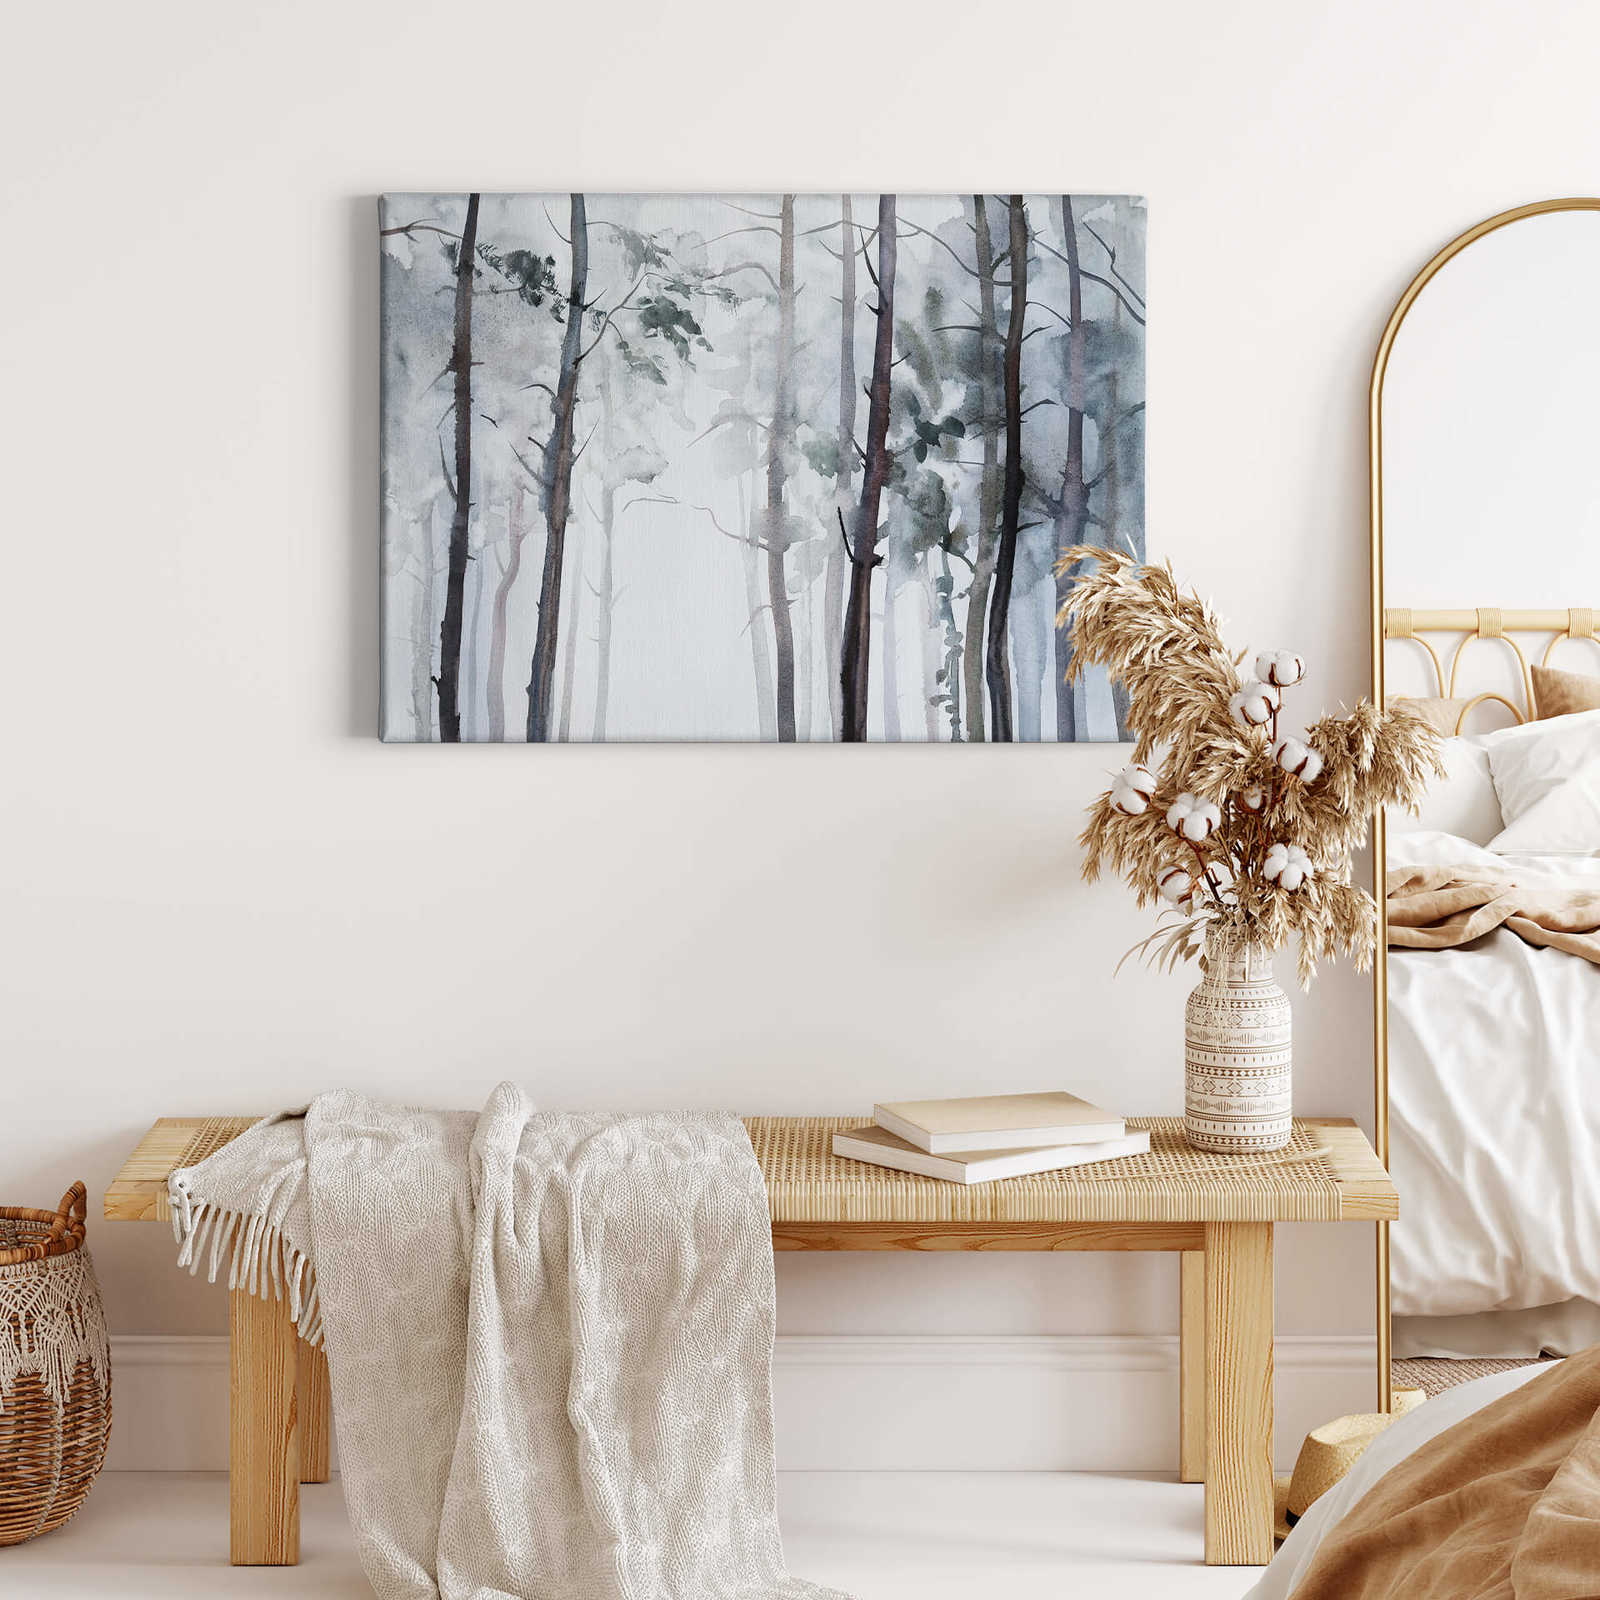             Canvas print watercolour forest – black and white
        